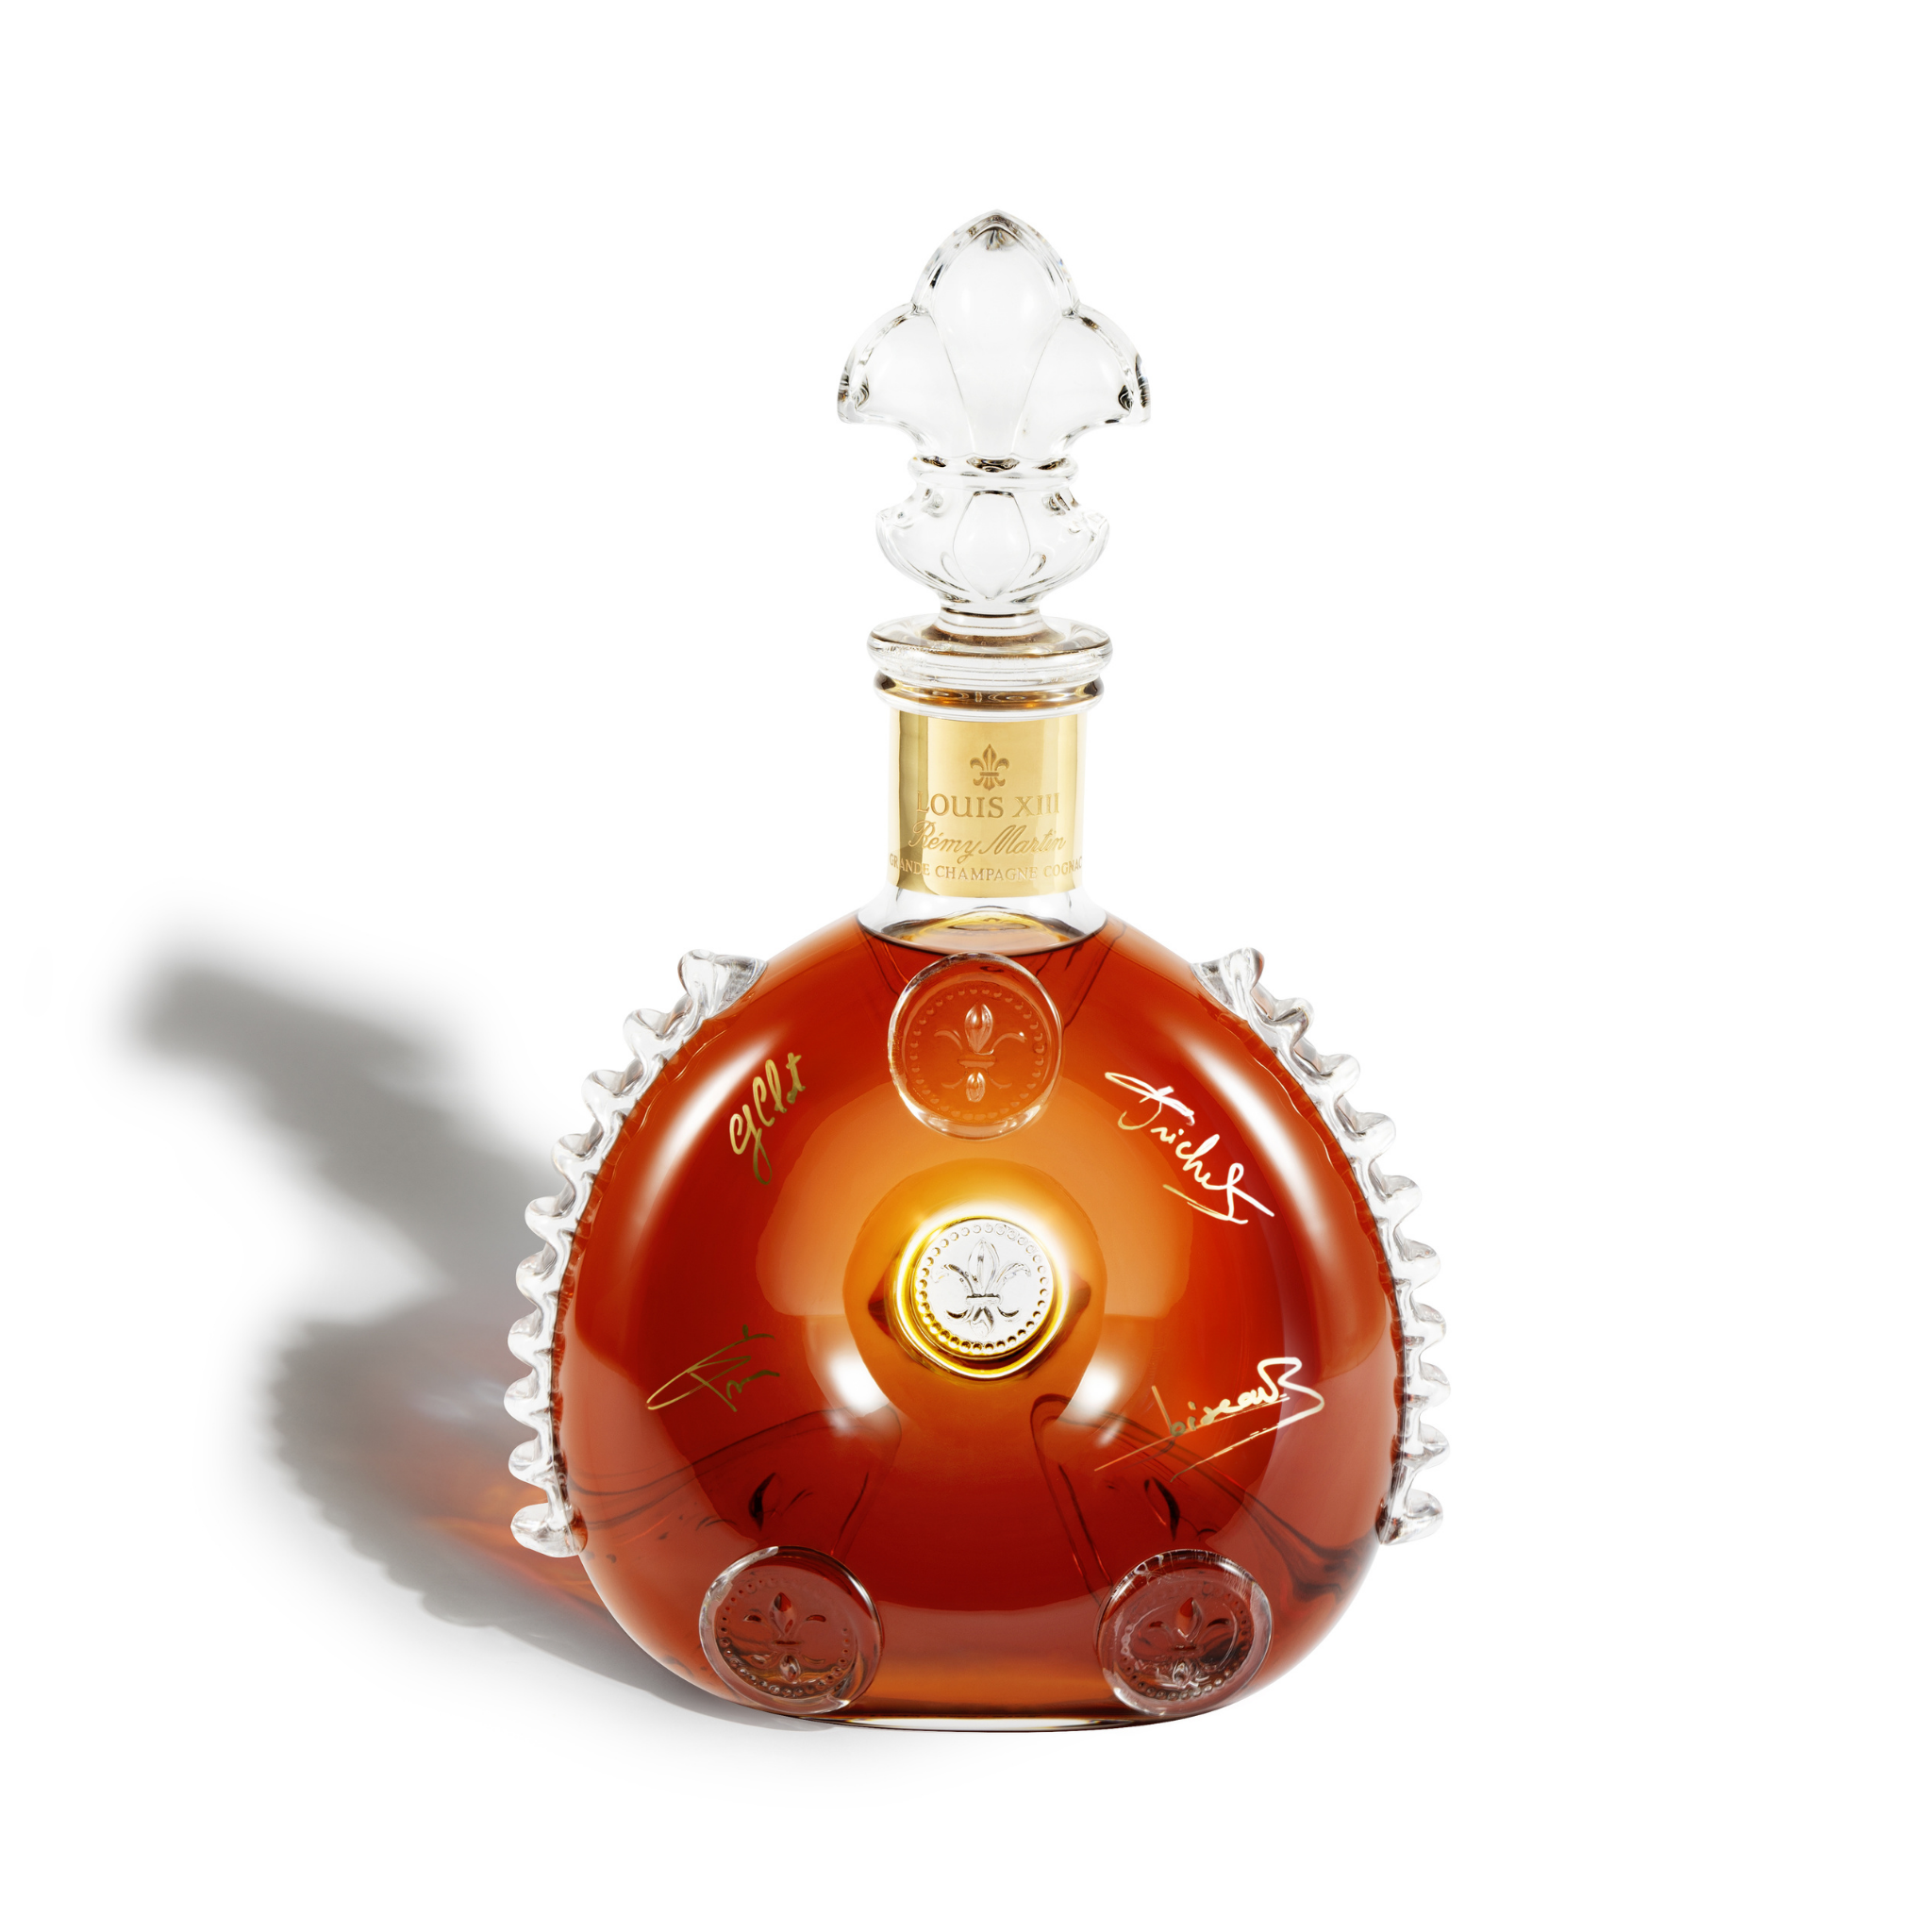 Four Bottles Sold of Louis XIII Cognac - Iceland Monitor